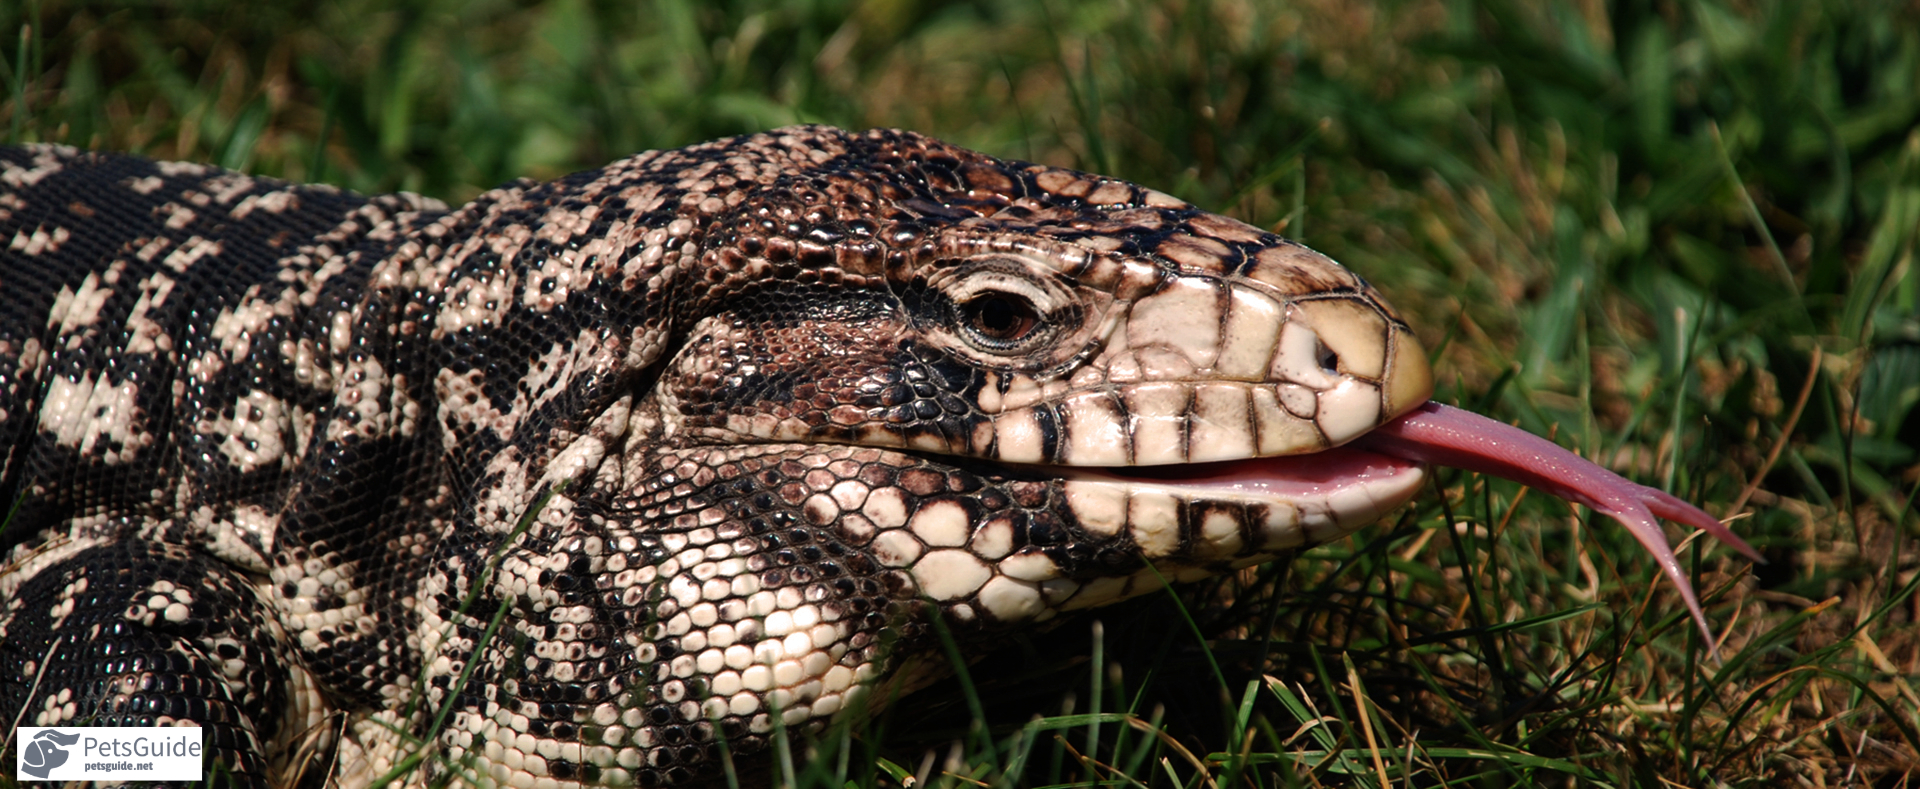 The Ultimate Guide to Caring for Your Argentine Black and White Tegu